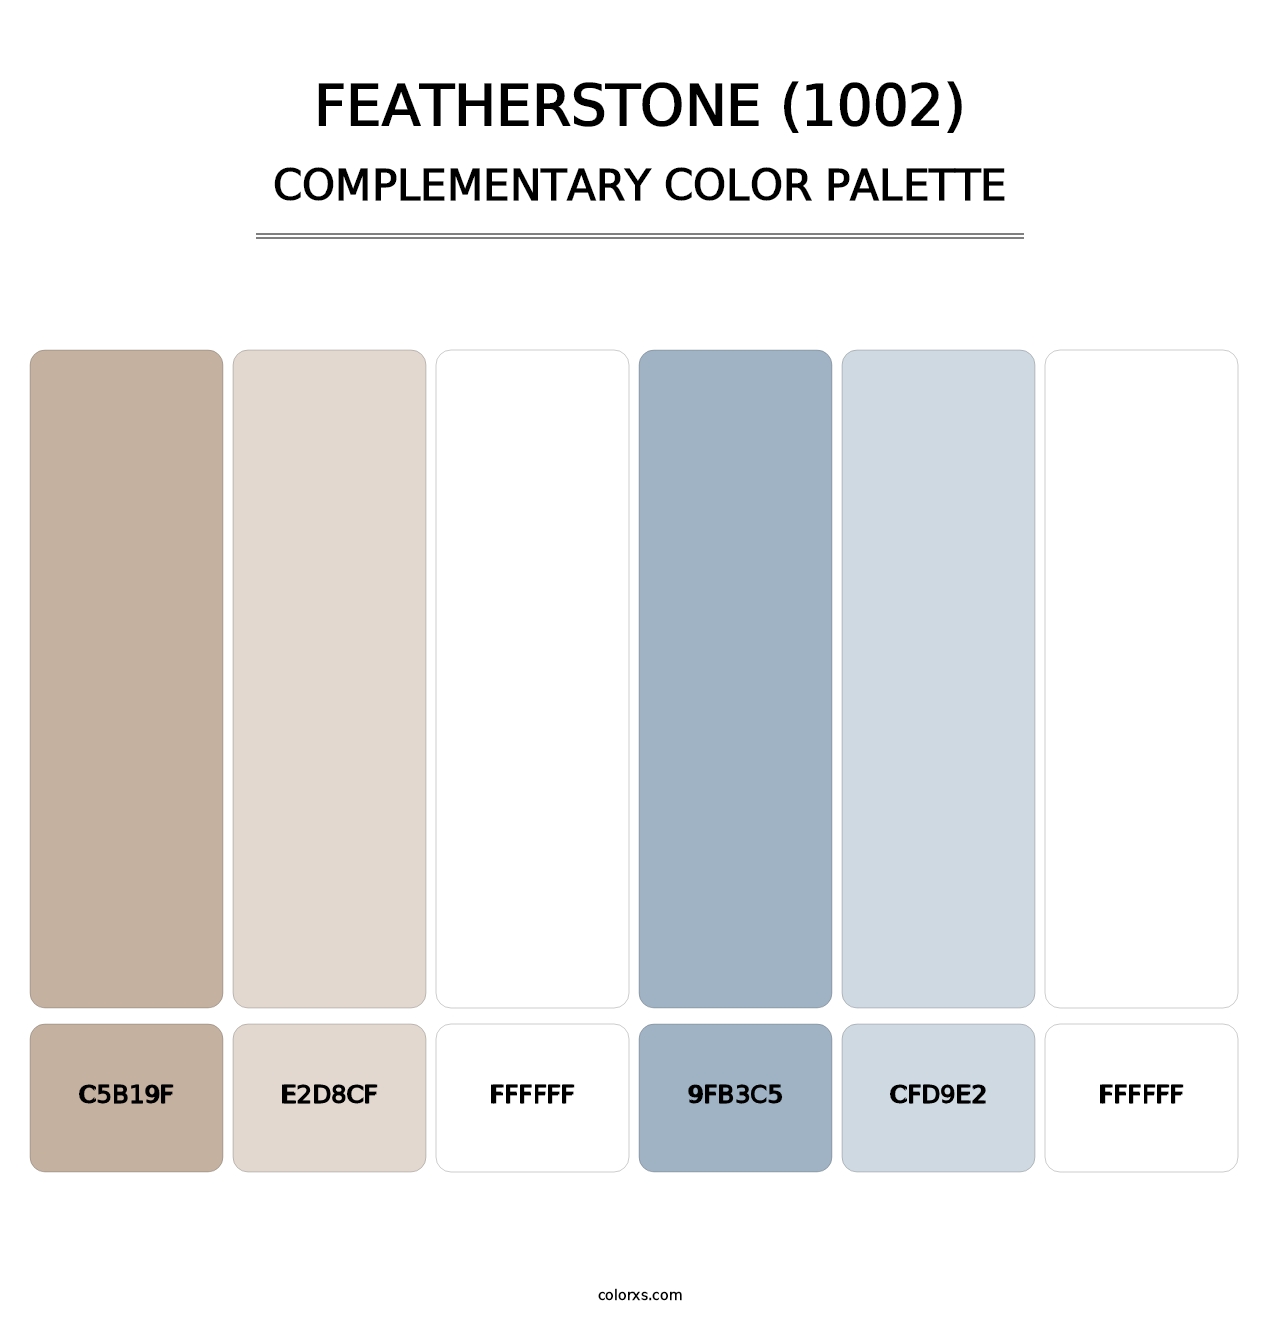 Featherstone (1002) - Complementary Color Palette